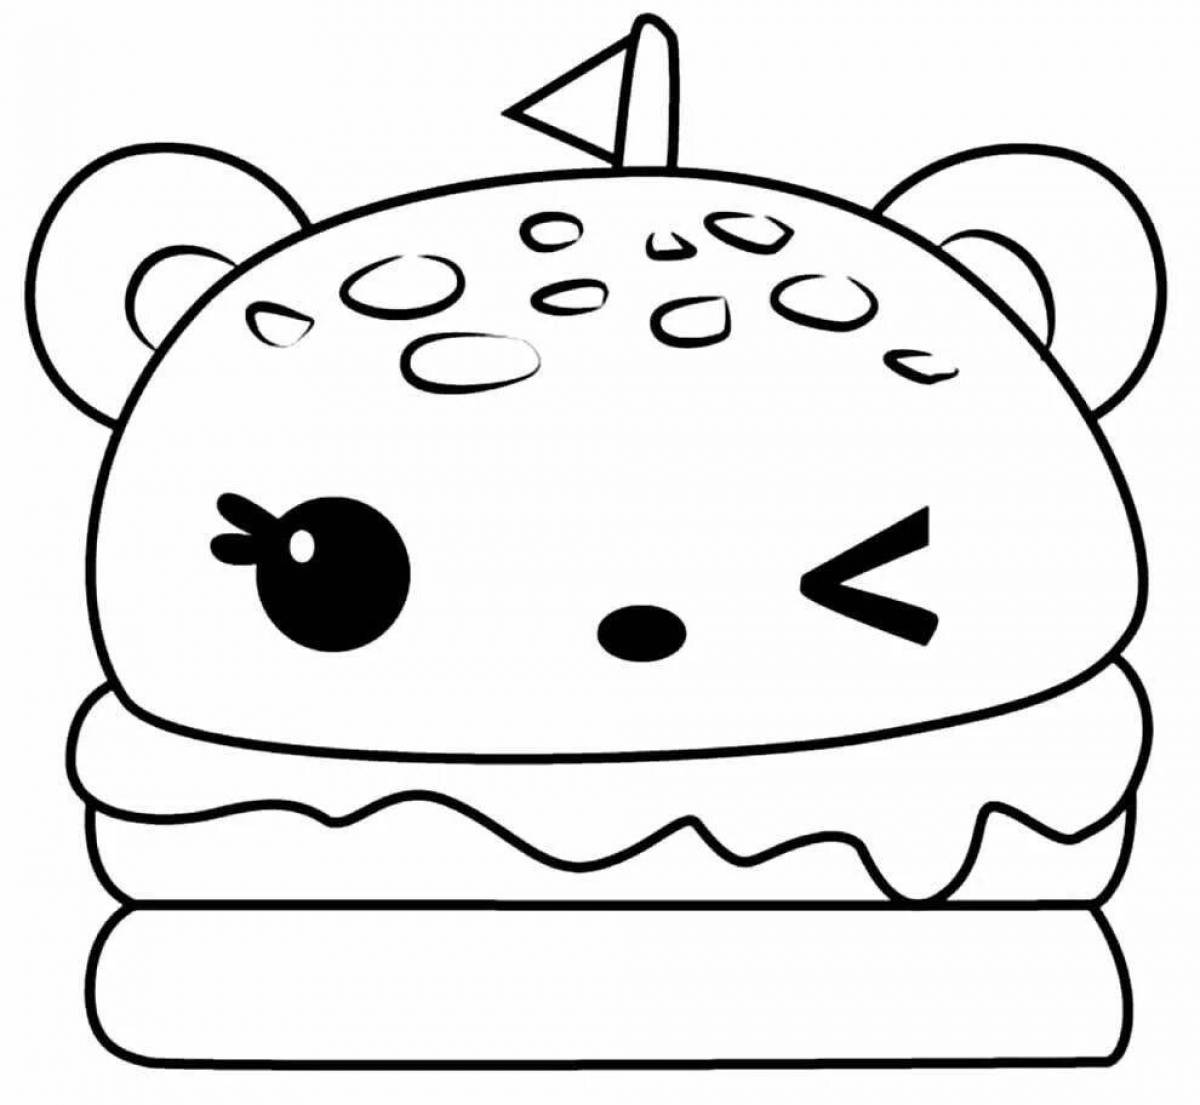 Exciting burger cat coloring page